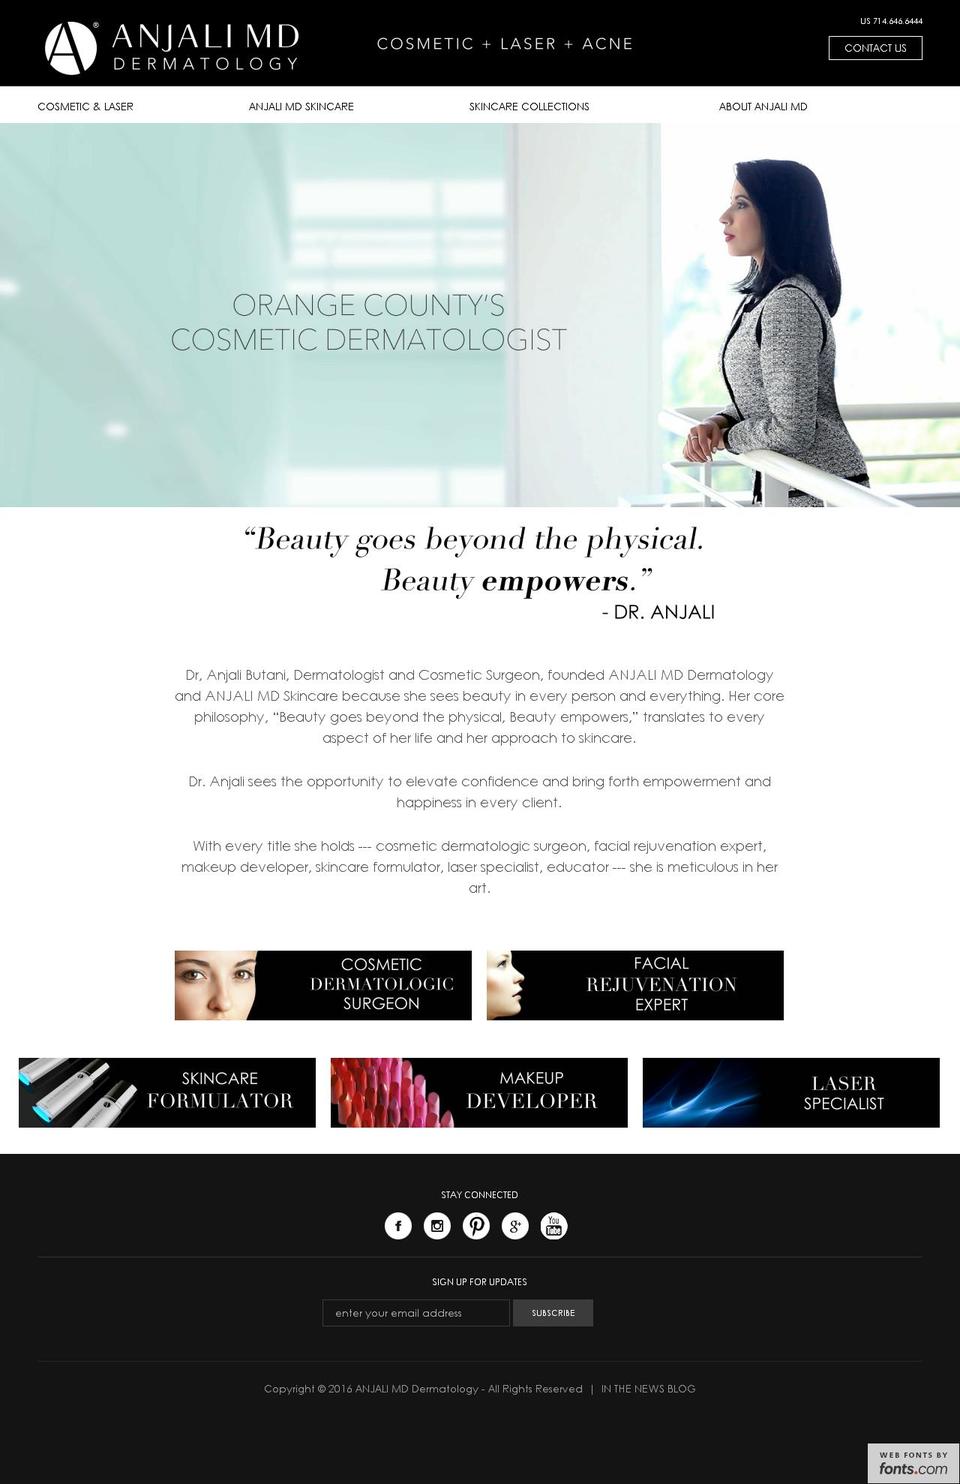 Anjali MD Site 2016 Shopify theme site example 844-oc-laser.com